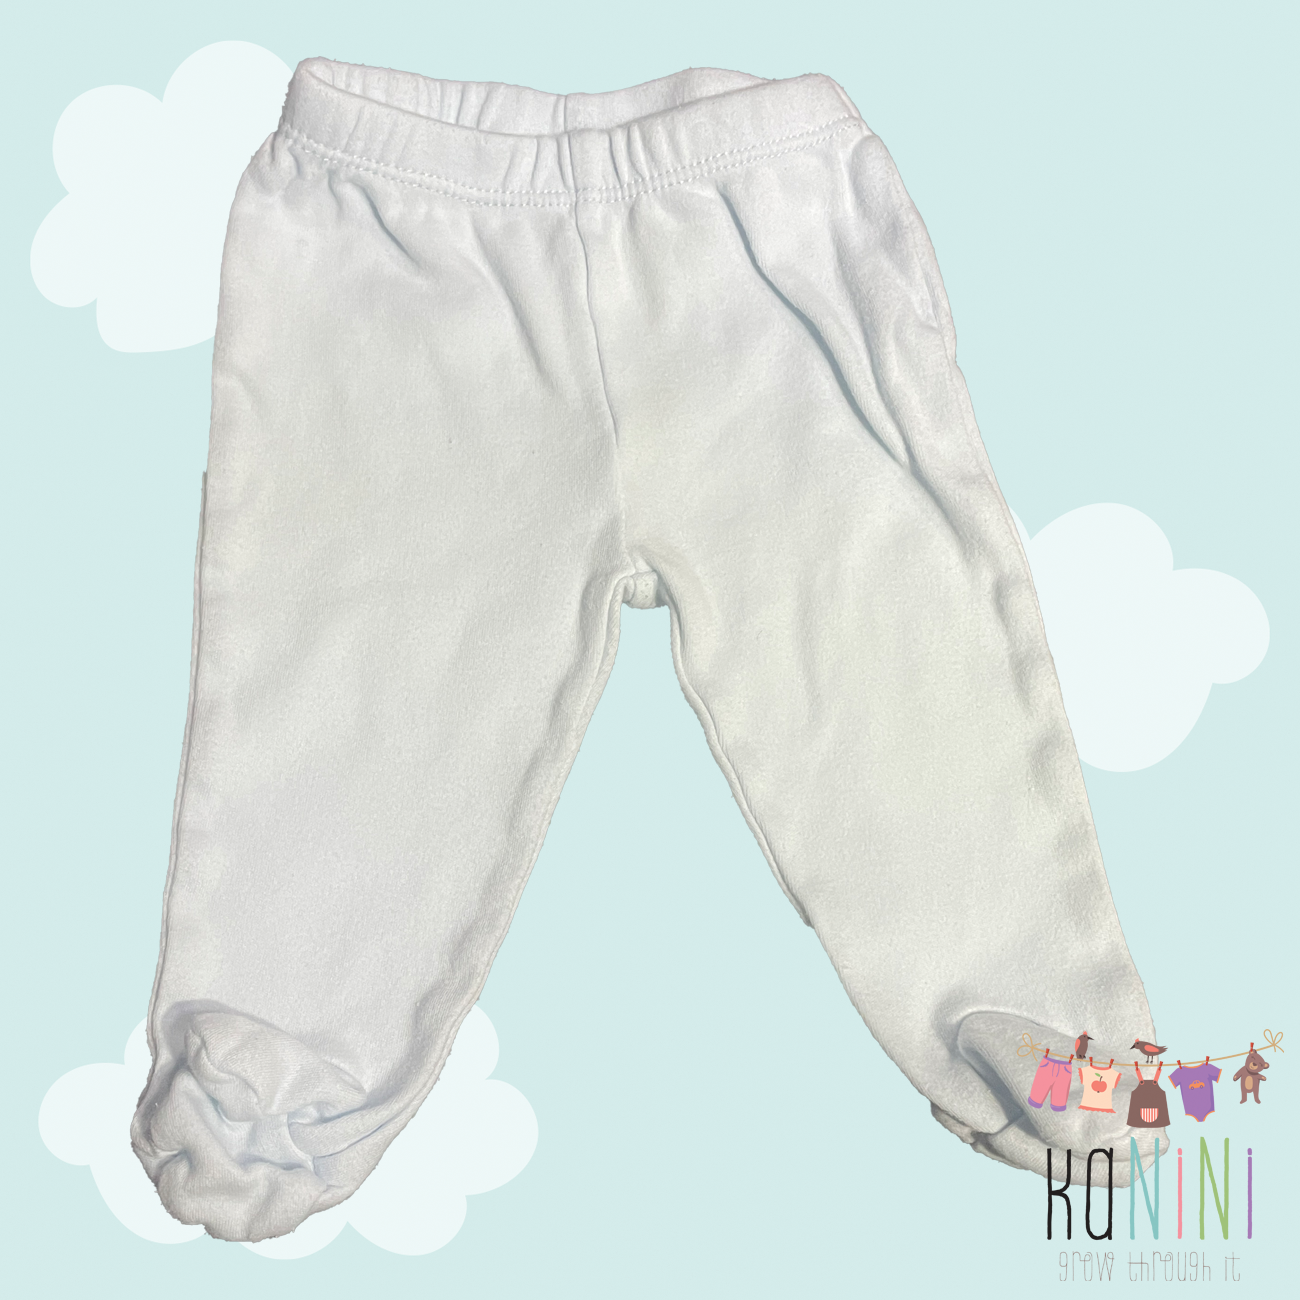 Featured image for “ZARA 1 - 3 Months Boys Leggings”